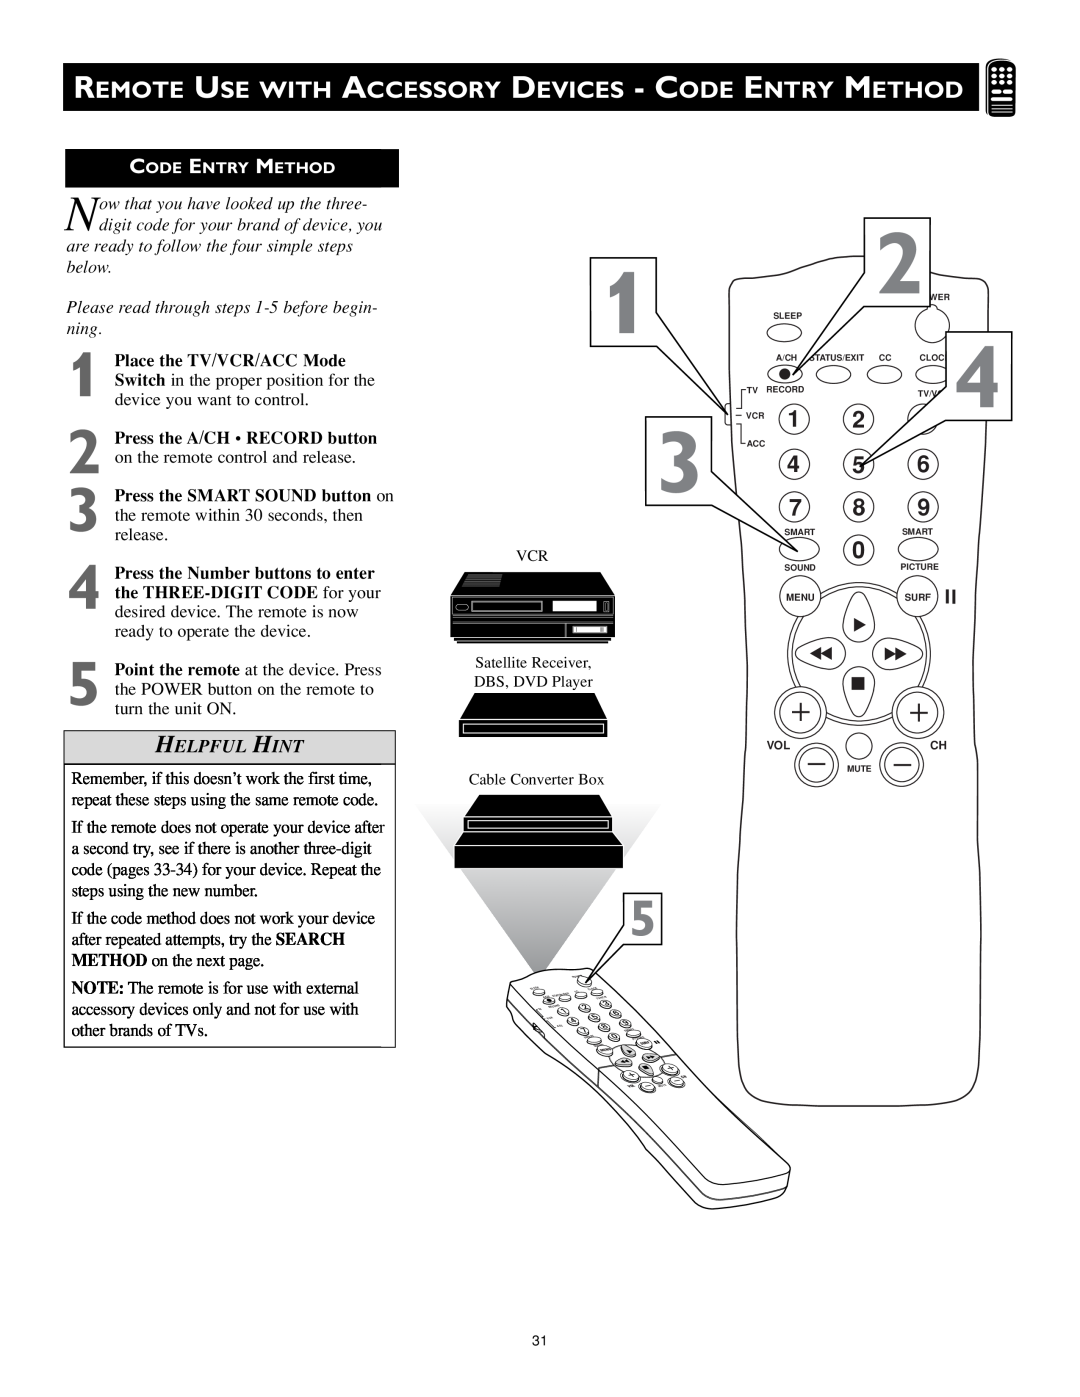 Magnavox MS3252S MS3652S Remote Use With Accessory Devices - Code Entry Method, Helpful Hint, Place the TV/VCR/ACC Mode 